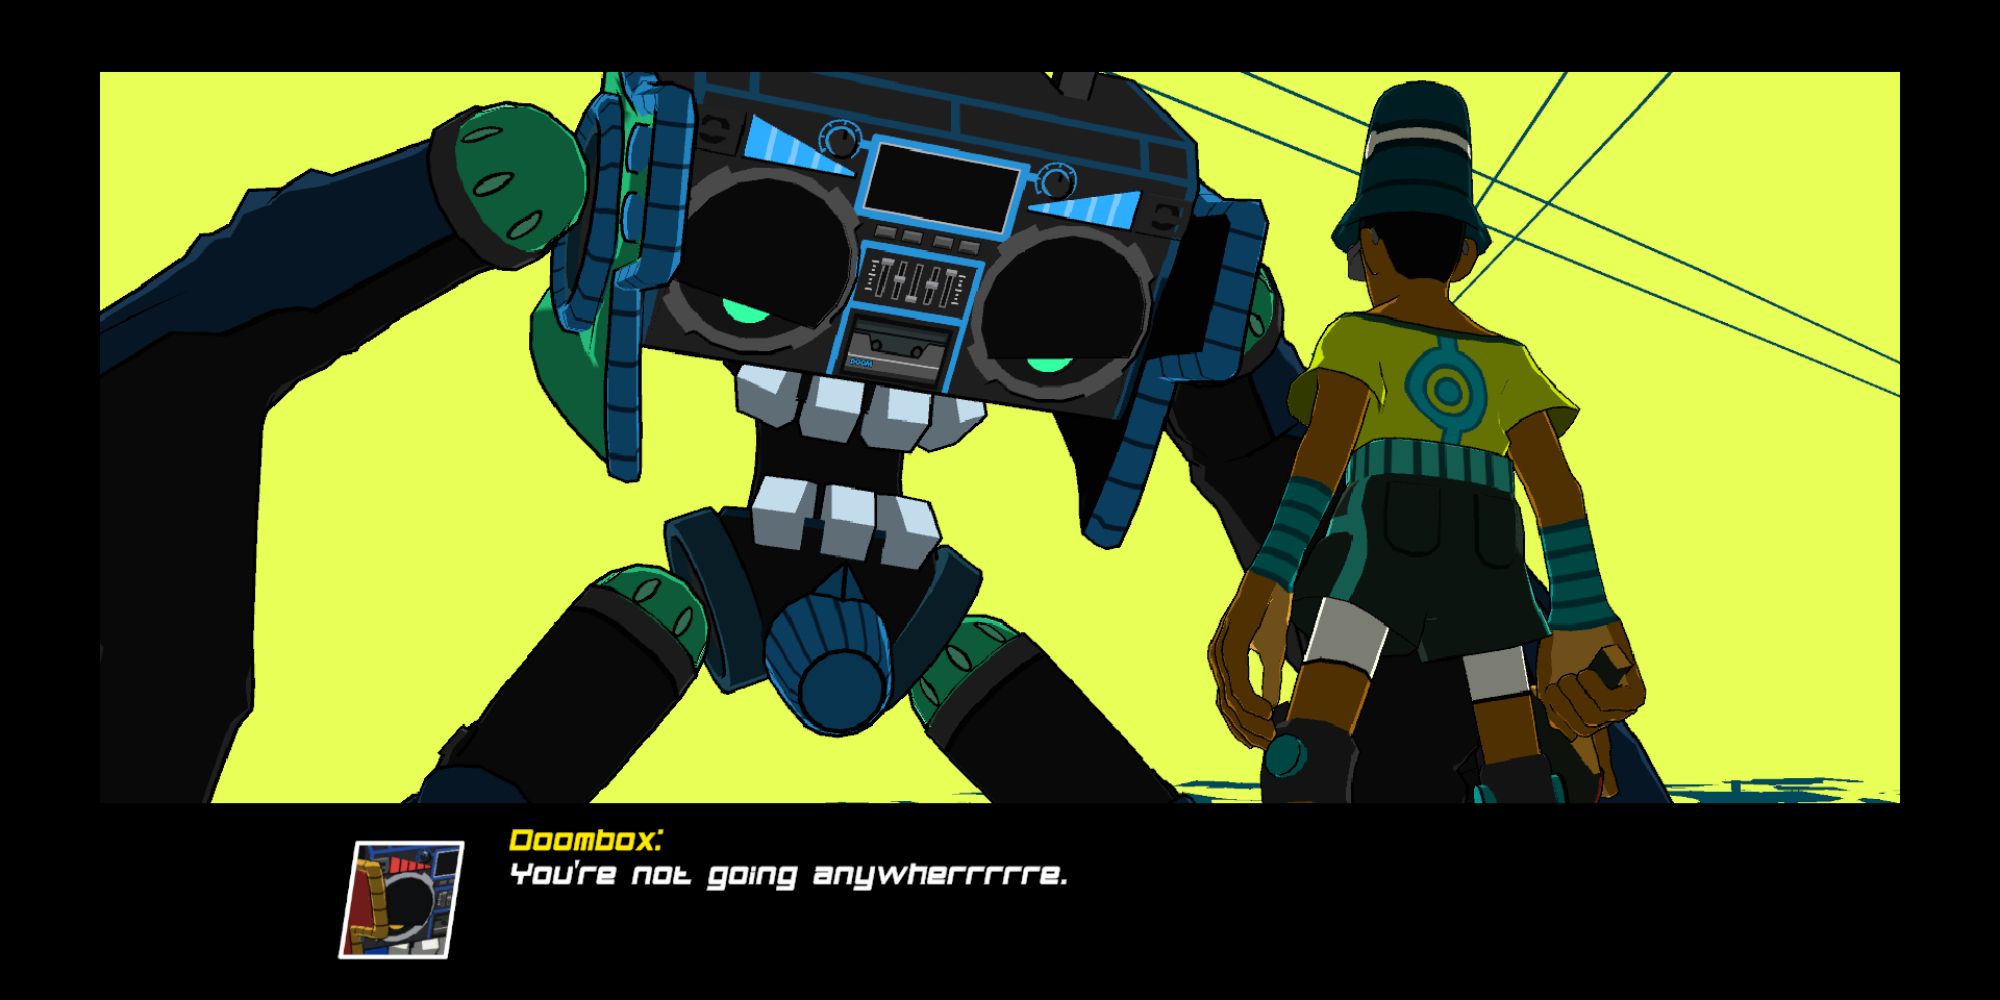 Lethal League Blaze a cutscene from the game's story mode with Doombox looming tall on the right over Dice against a yellow background with Doombox's dialogue beneath them